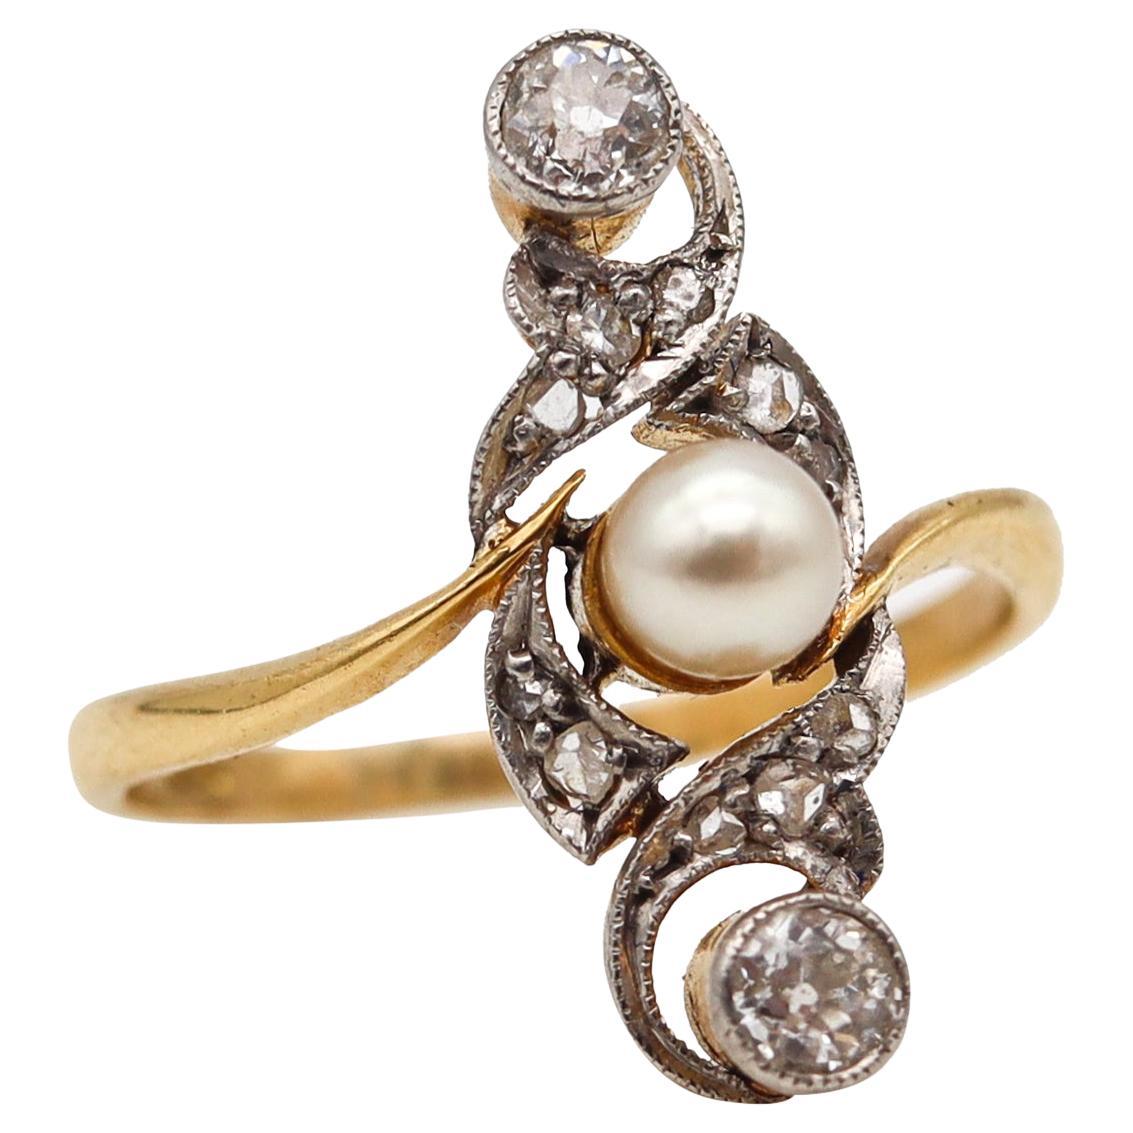 Art Nouveau 1910 Edwardian Natural Pearl Ring in 18Kt Gold with Rose Cut Diamond